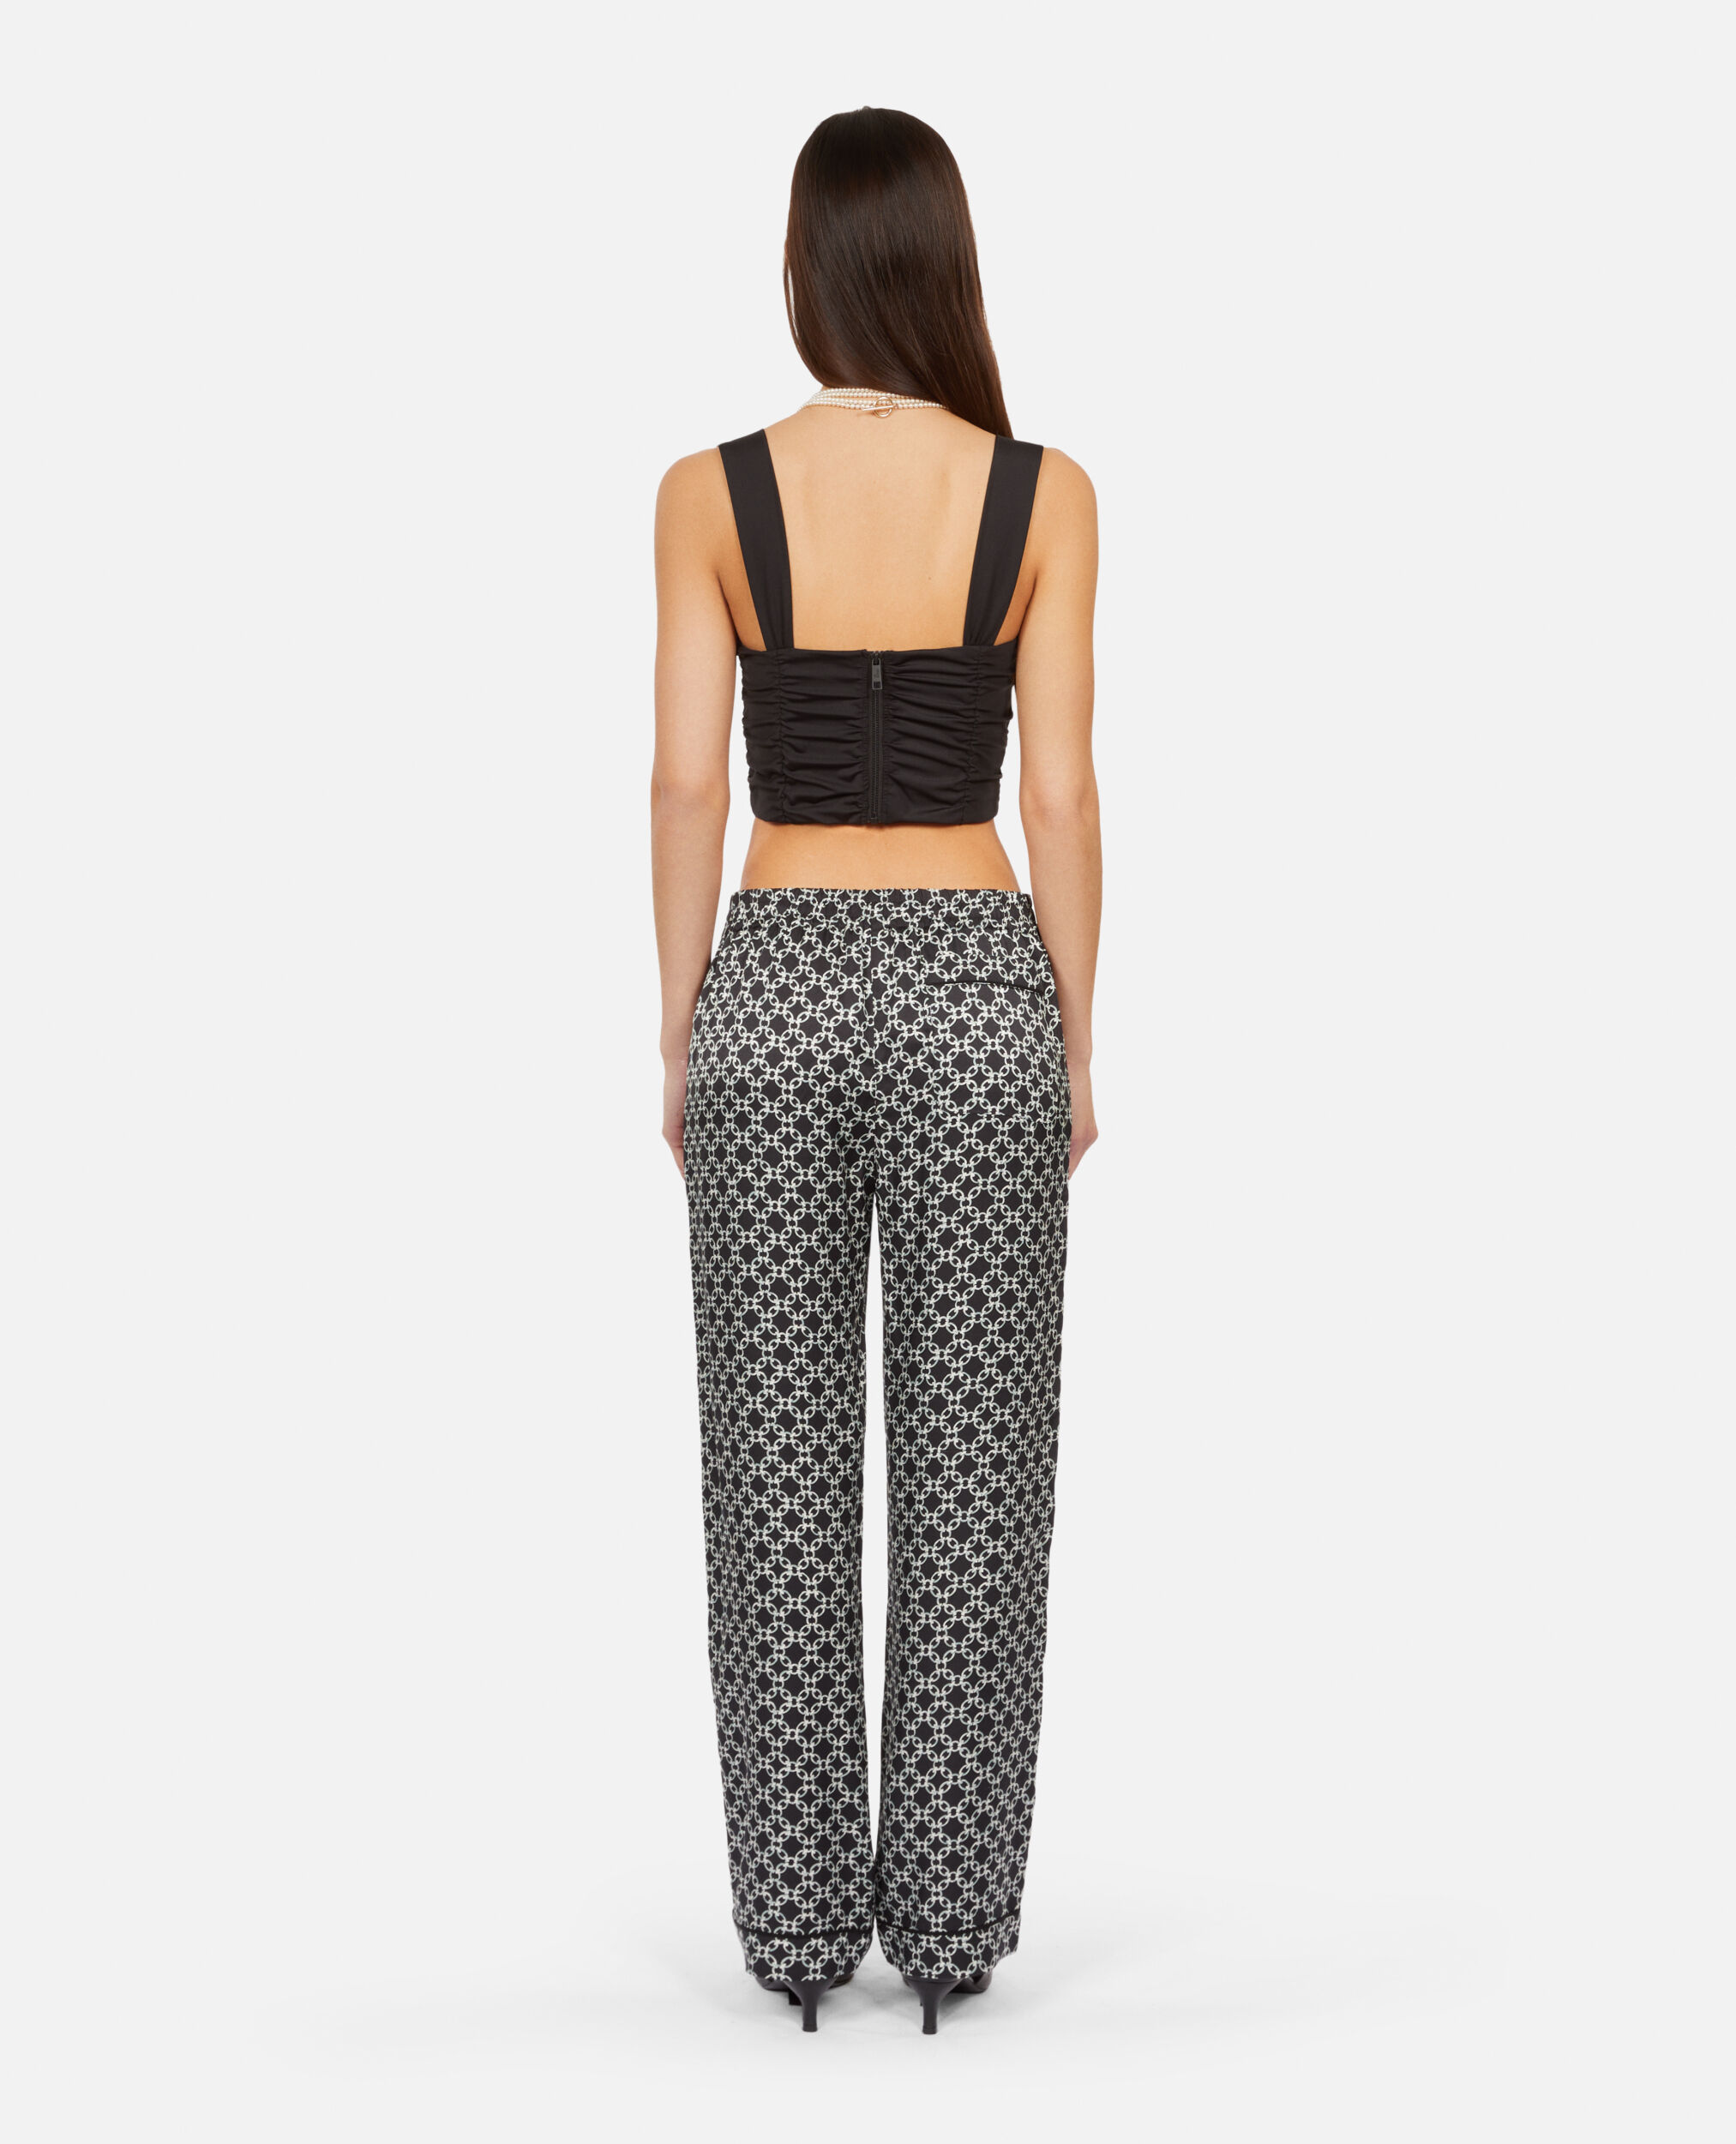 Printed trousers, BLACK WHITE, hi-res image number null